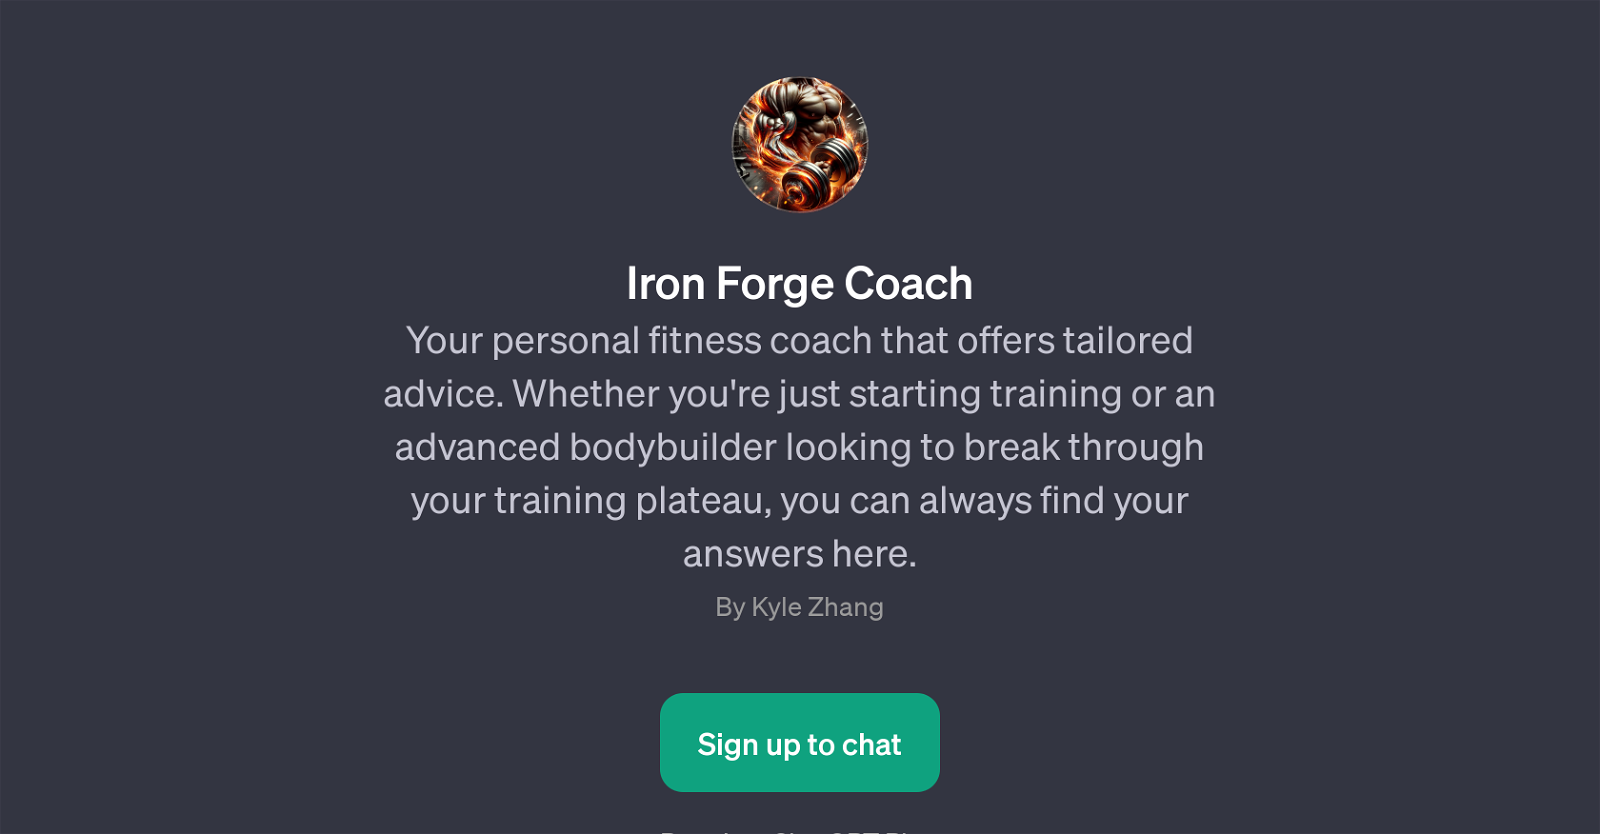 Iron Forge Coach website